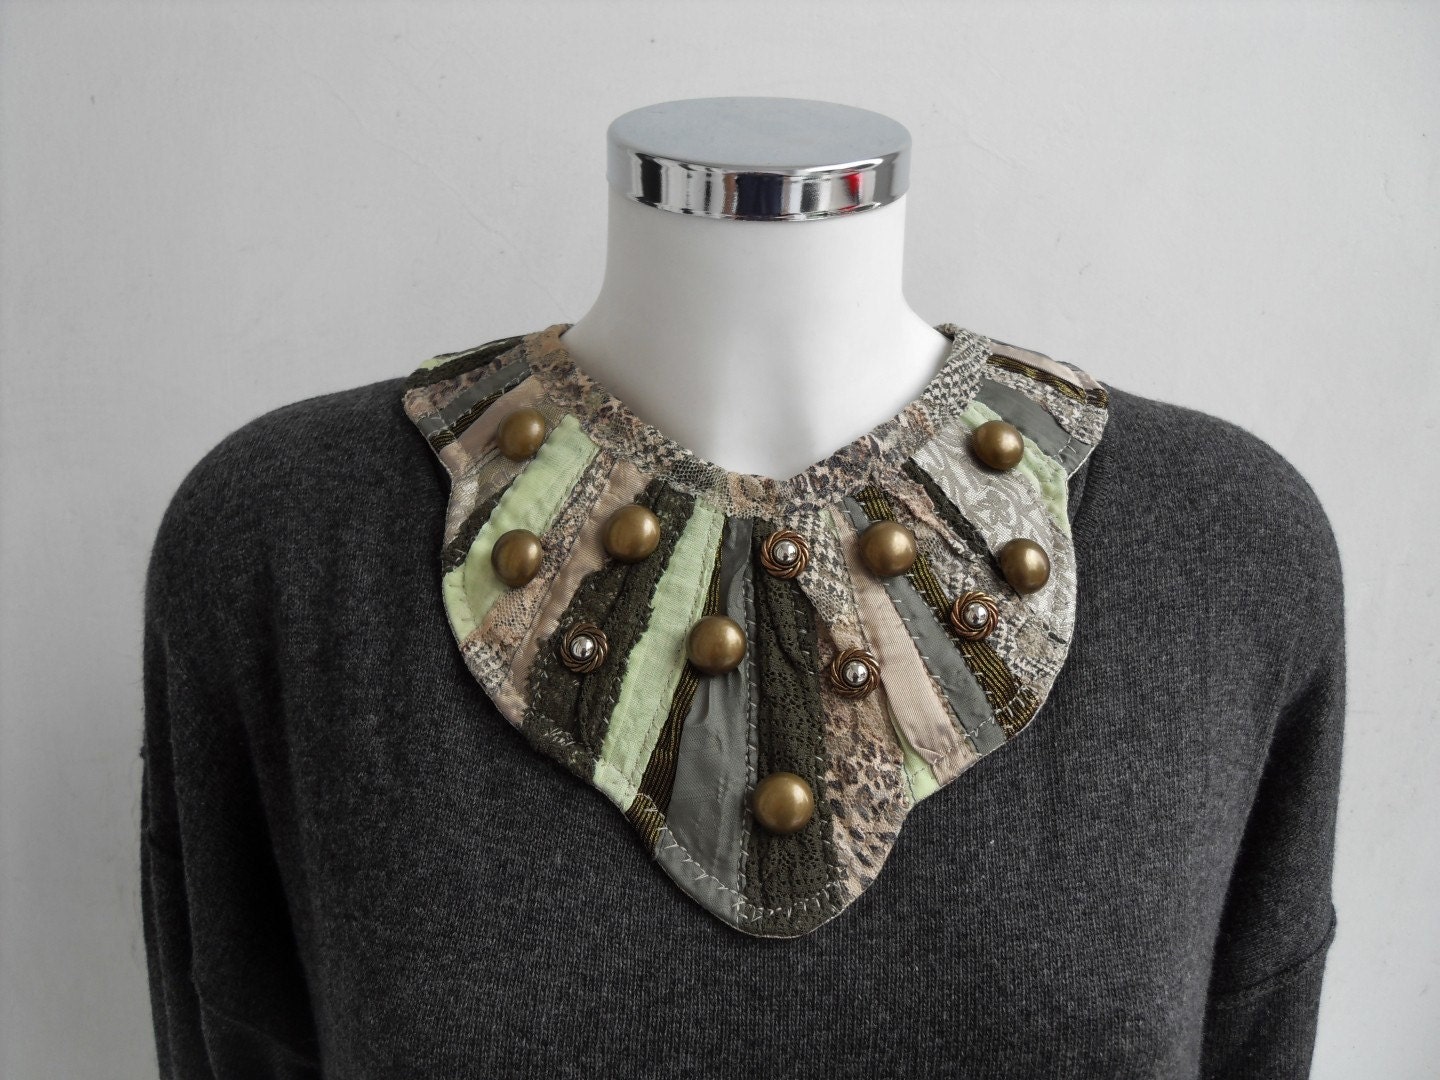 ARMY GAMES AND CAMOUFLAGE COLLAR NECKLACE by UnderReconstruction